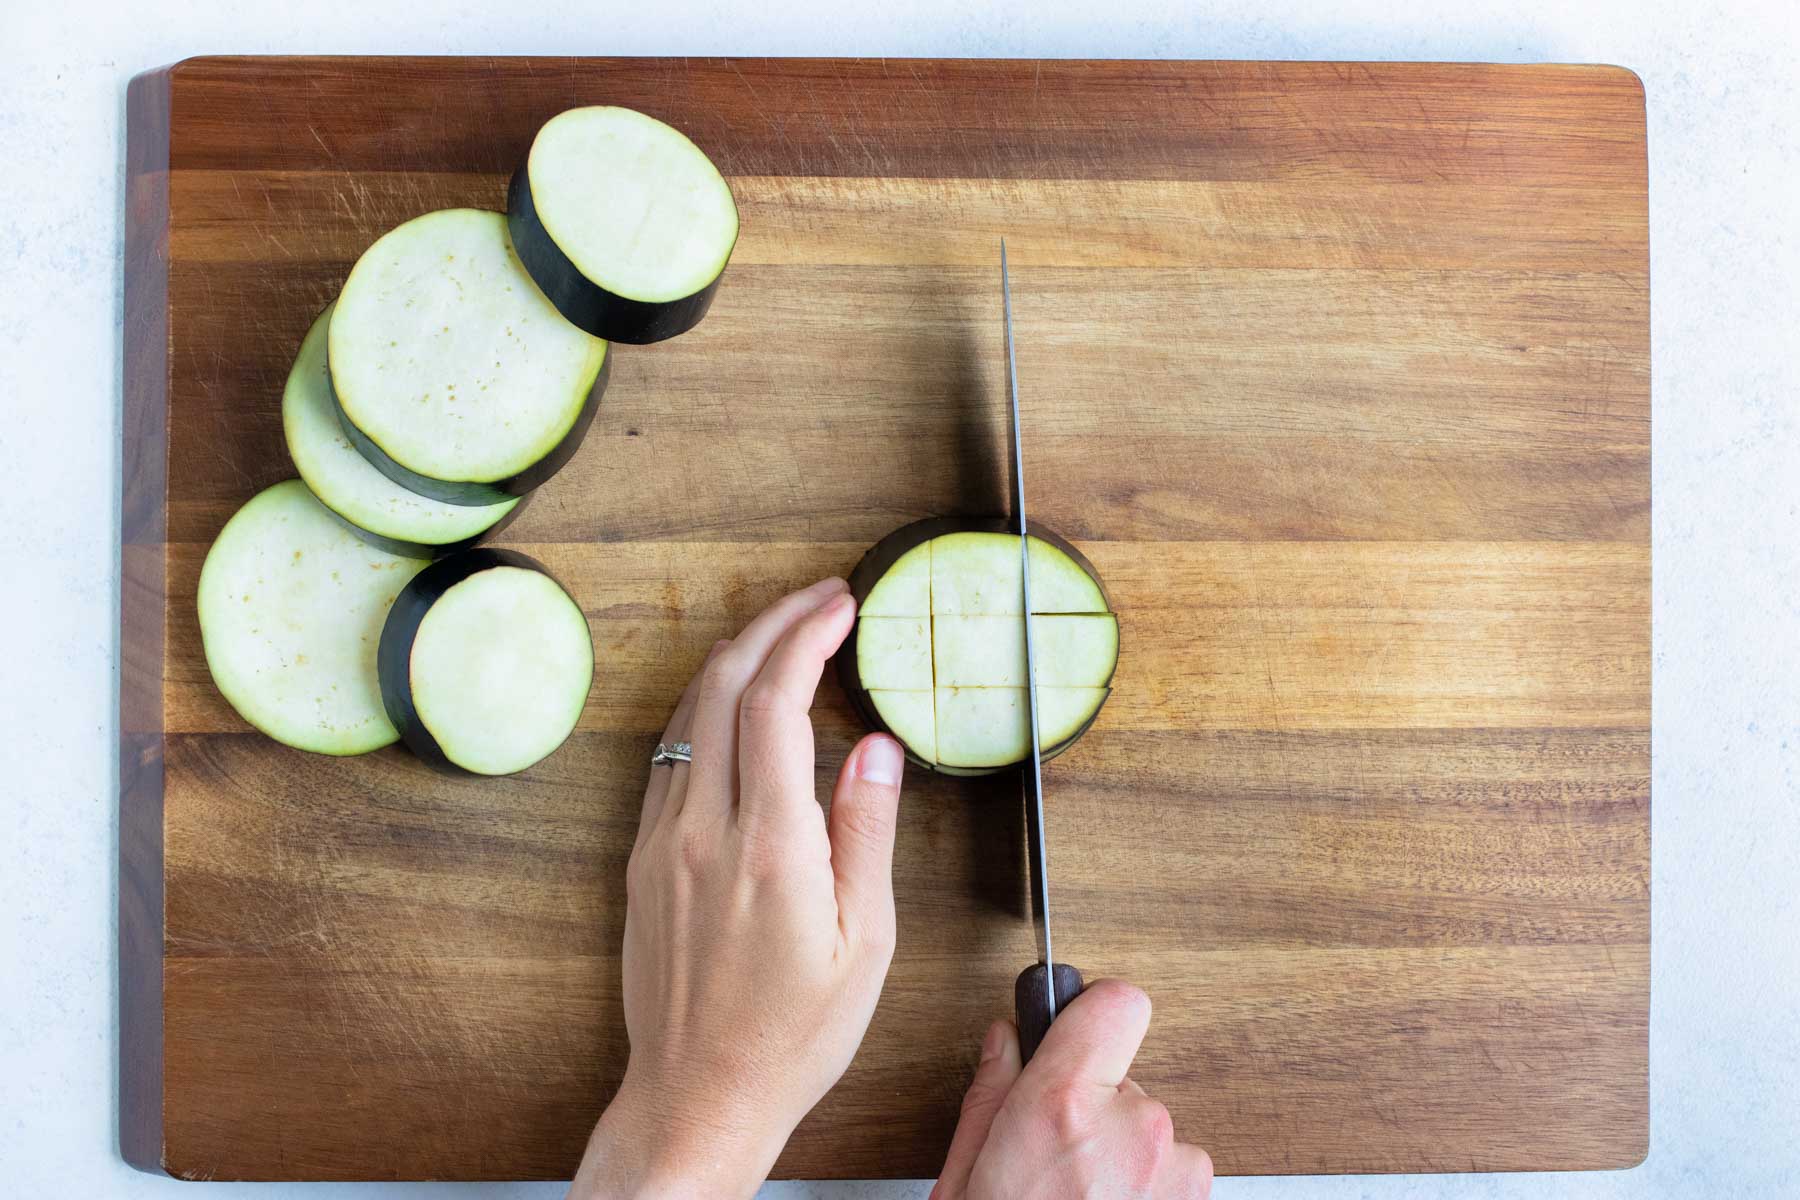 The eggplant is cubed on a cutting board.